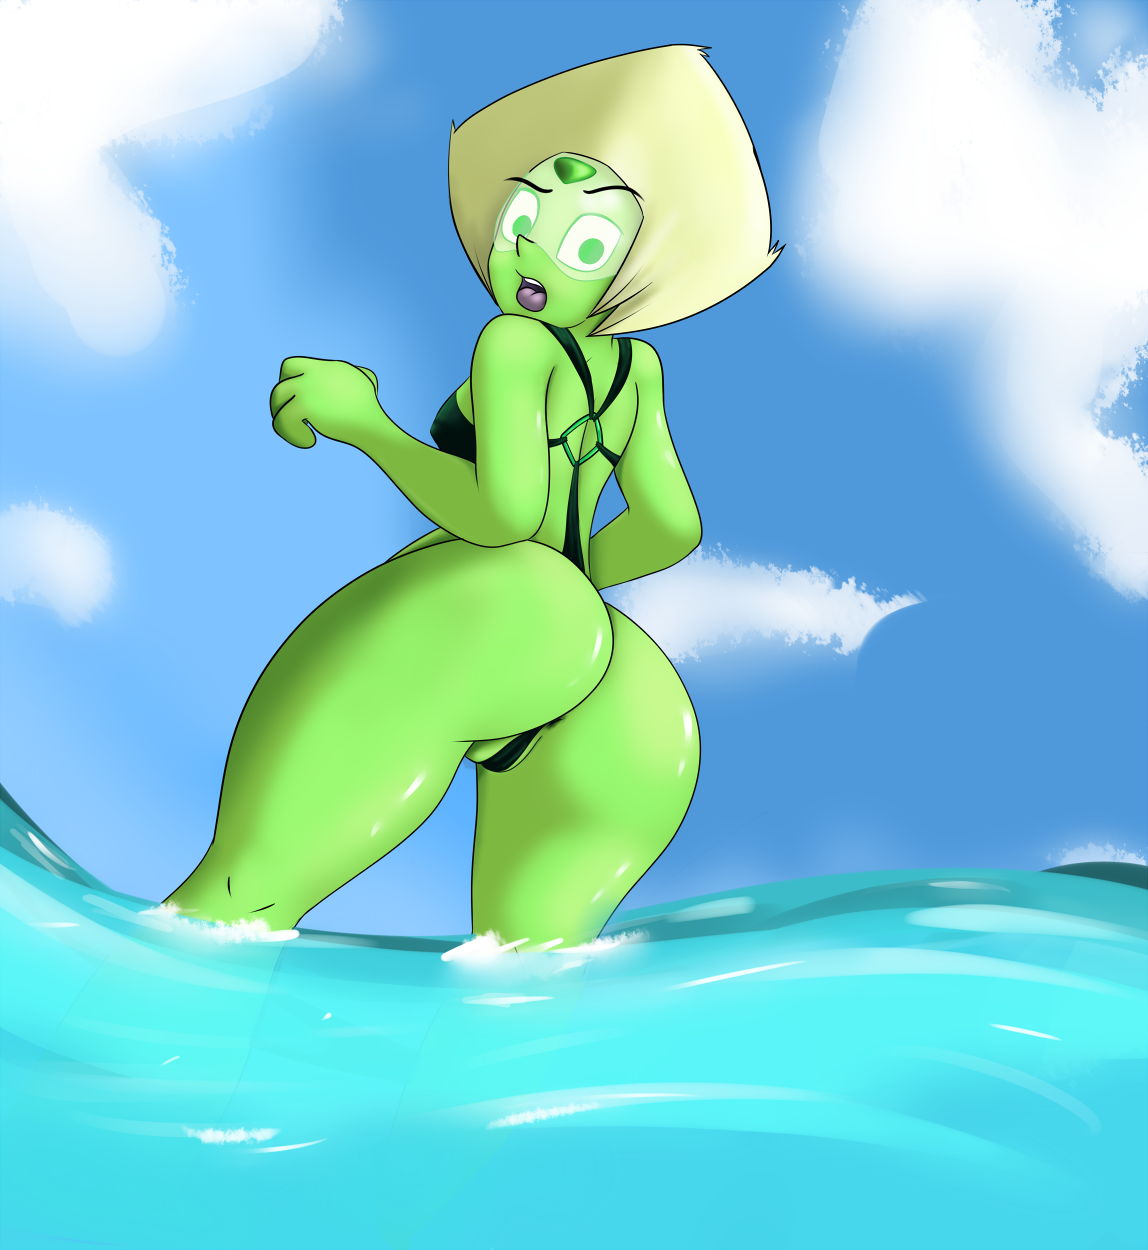 neronovasart: Beach Peribooty Getting some practice drawing the gems, and Peridot